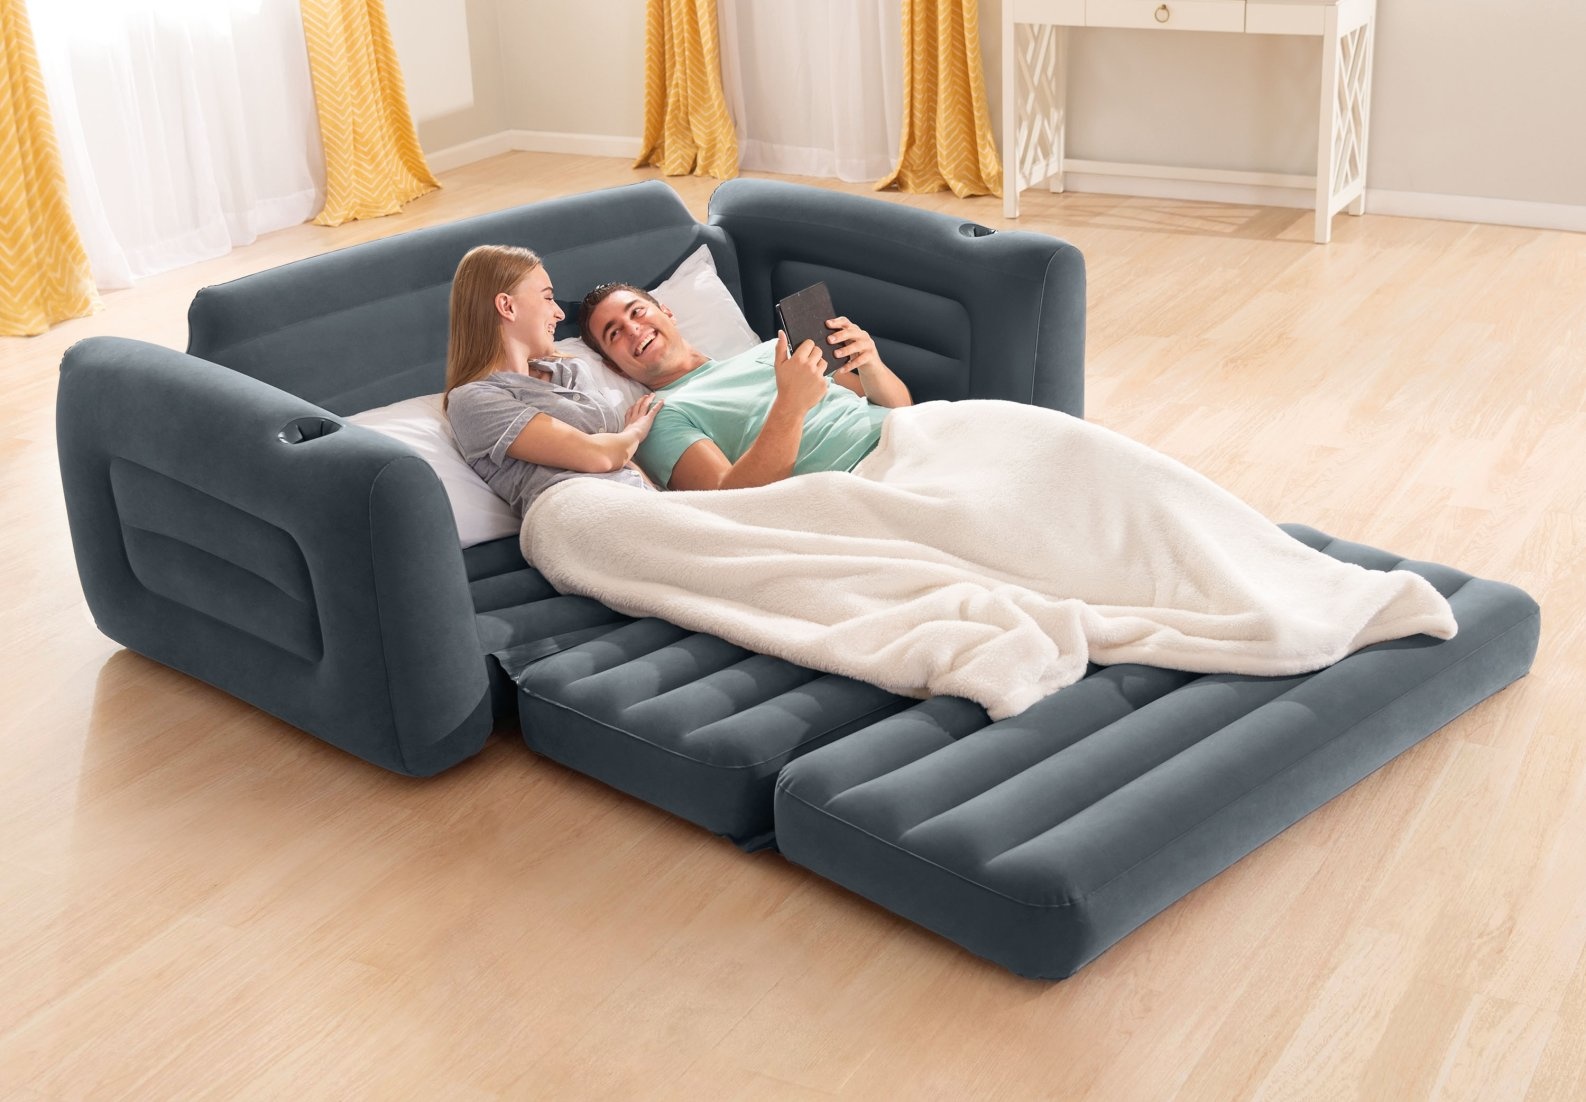 ntex pull-out sofa inflatable bed